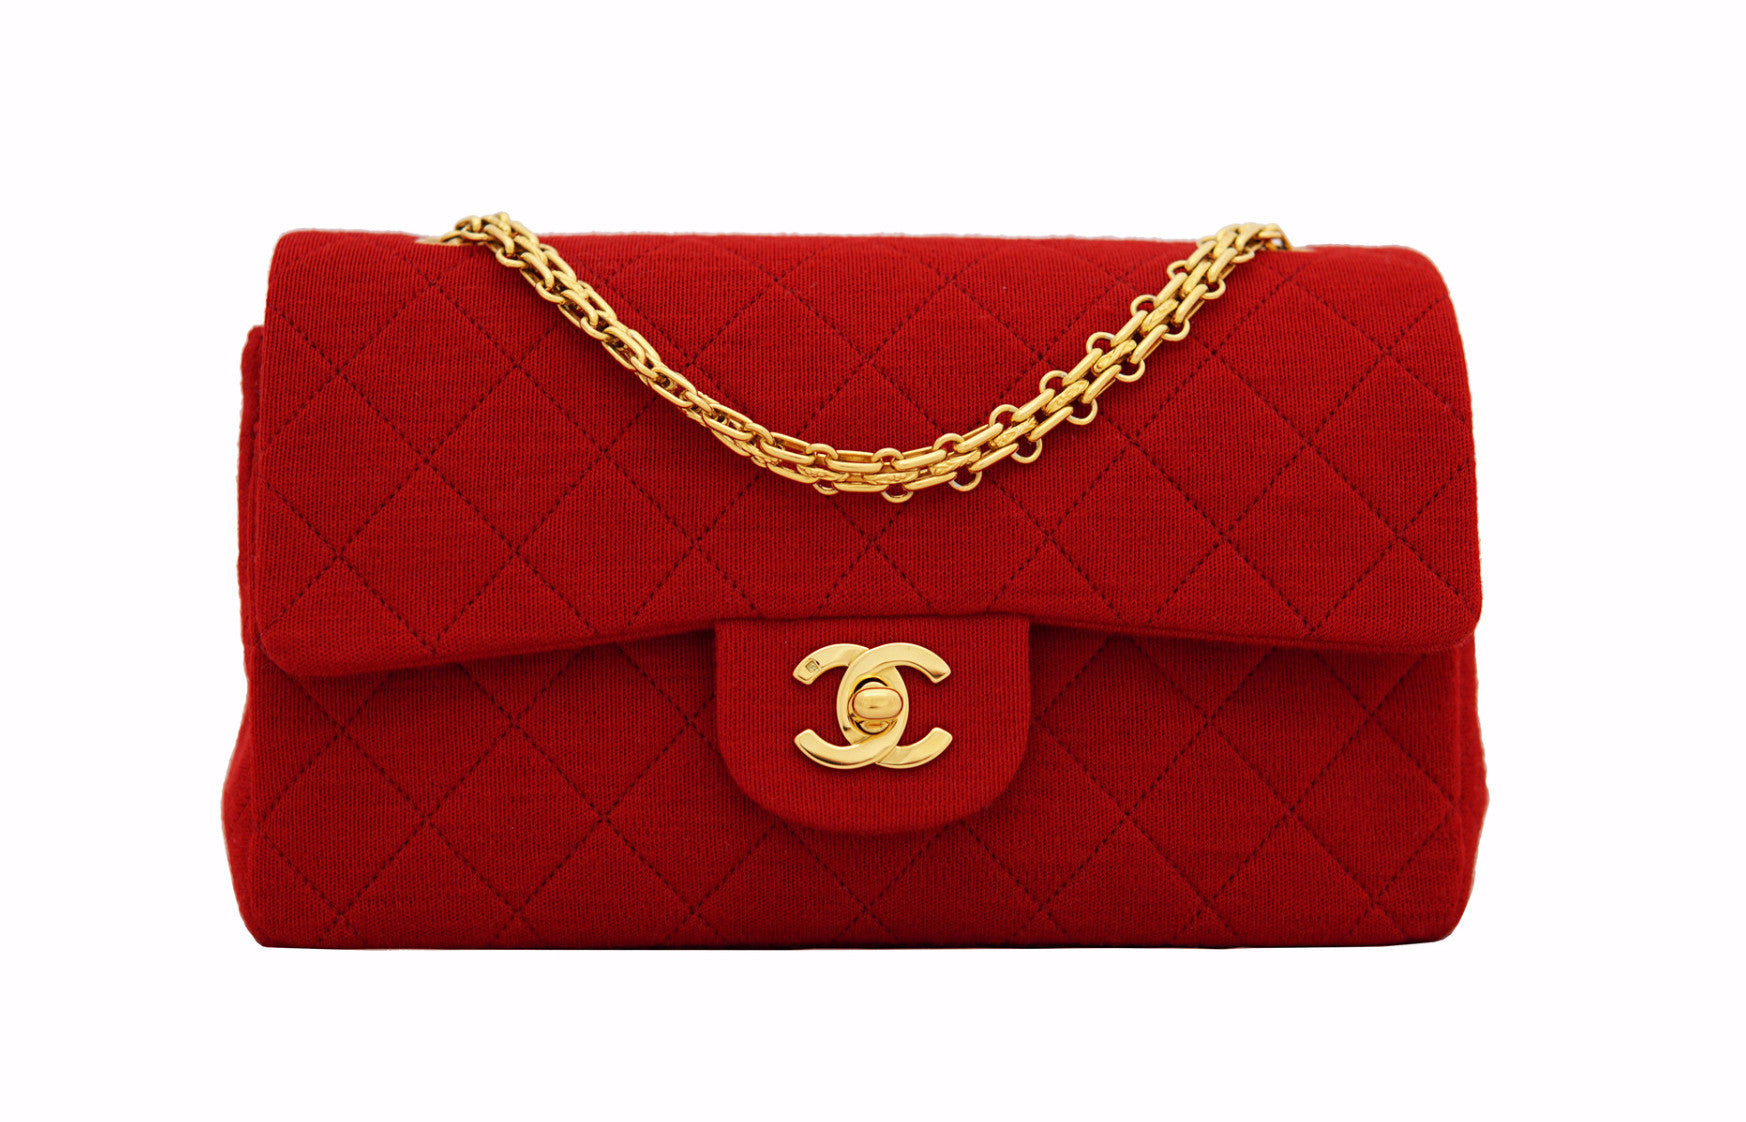 CHANEL VINTAGE BAG - Classic 2.55 Double Flap in Jersey Red - Vintage District